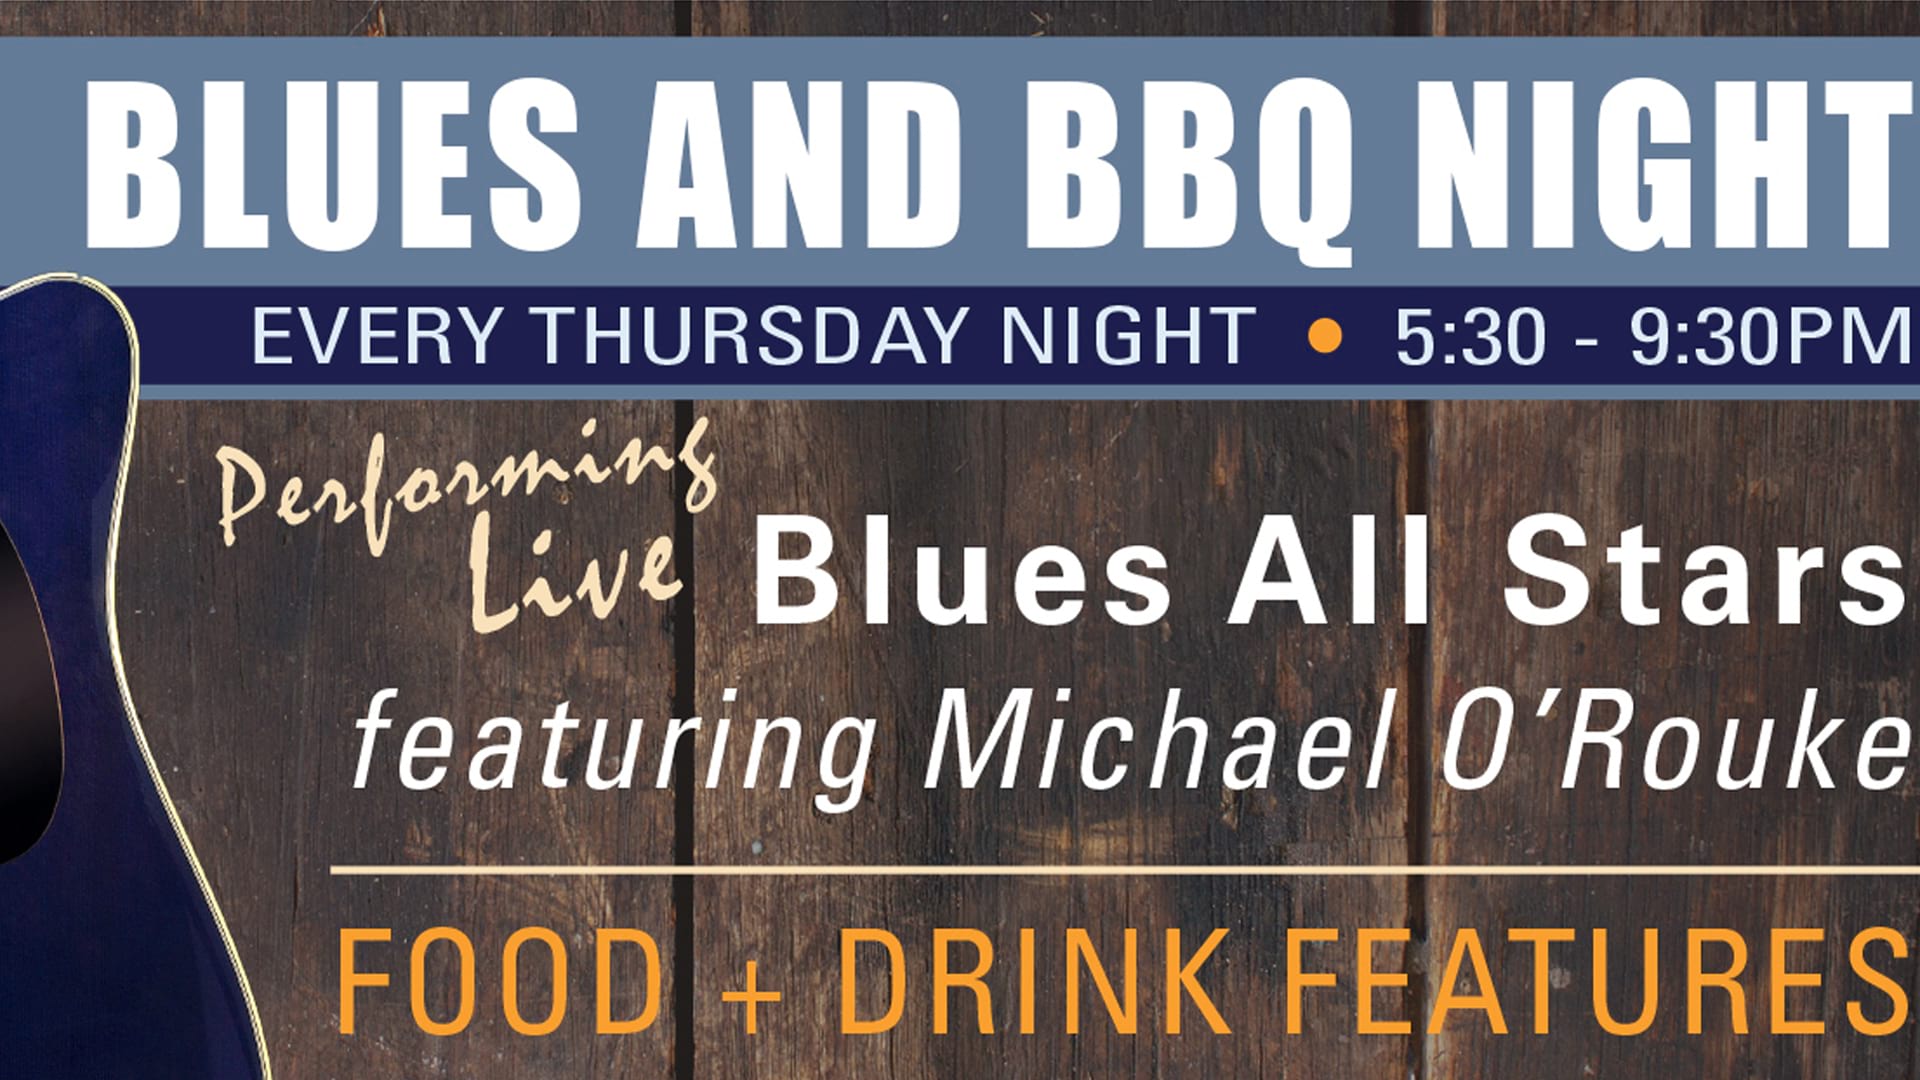 BBQ and Blues Night Special with live performances, drinks and food announcements.